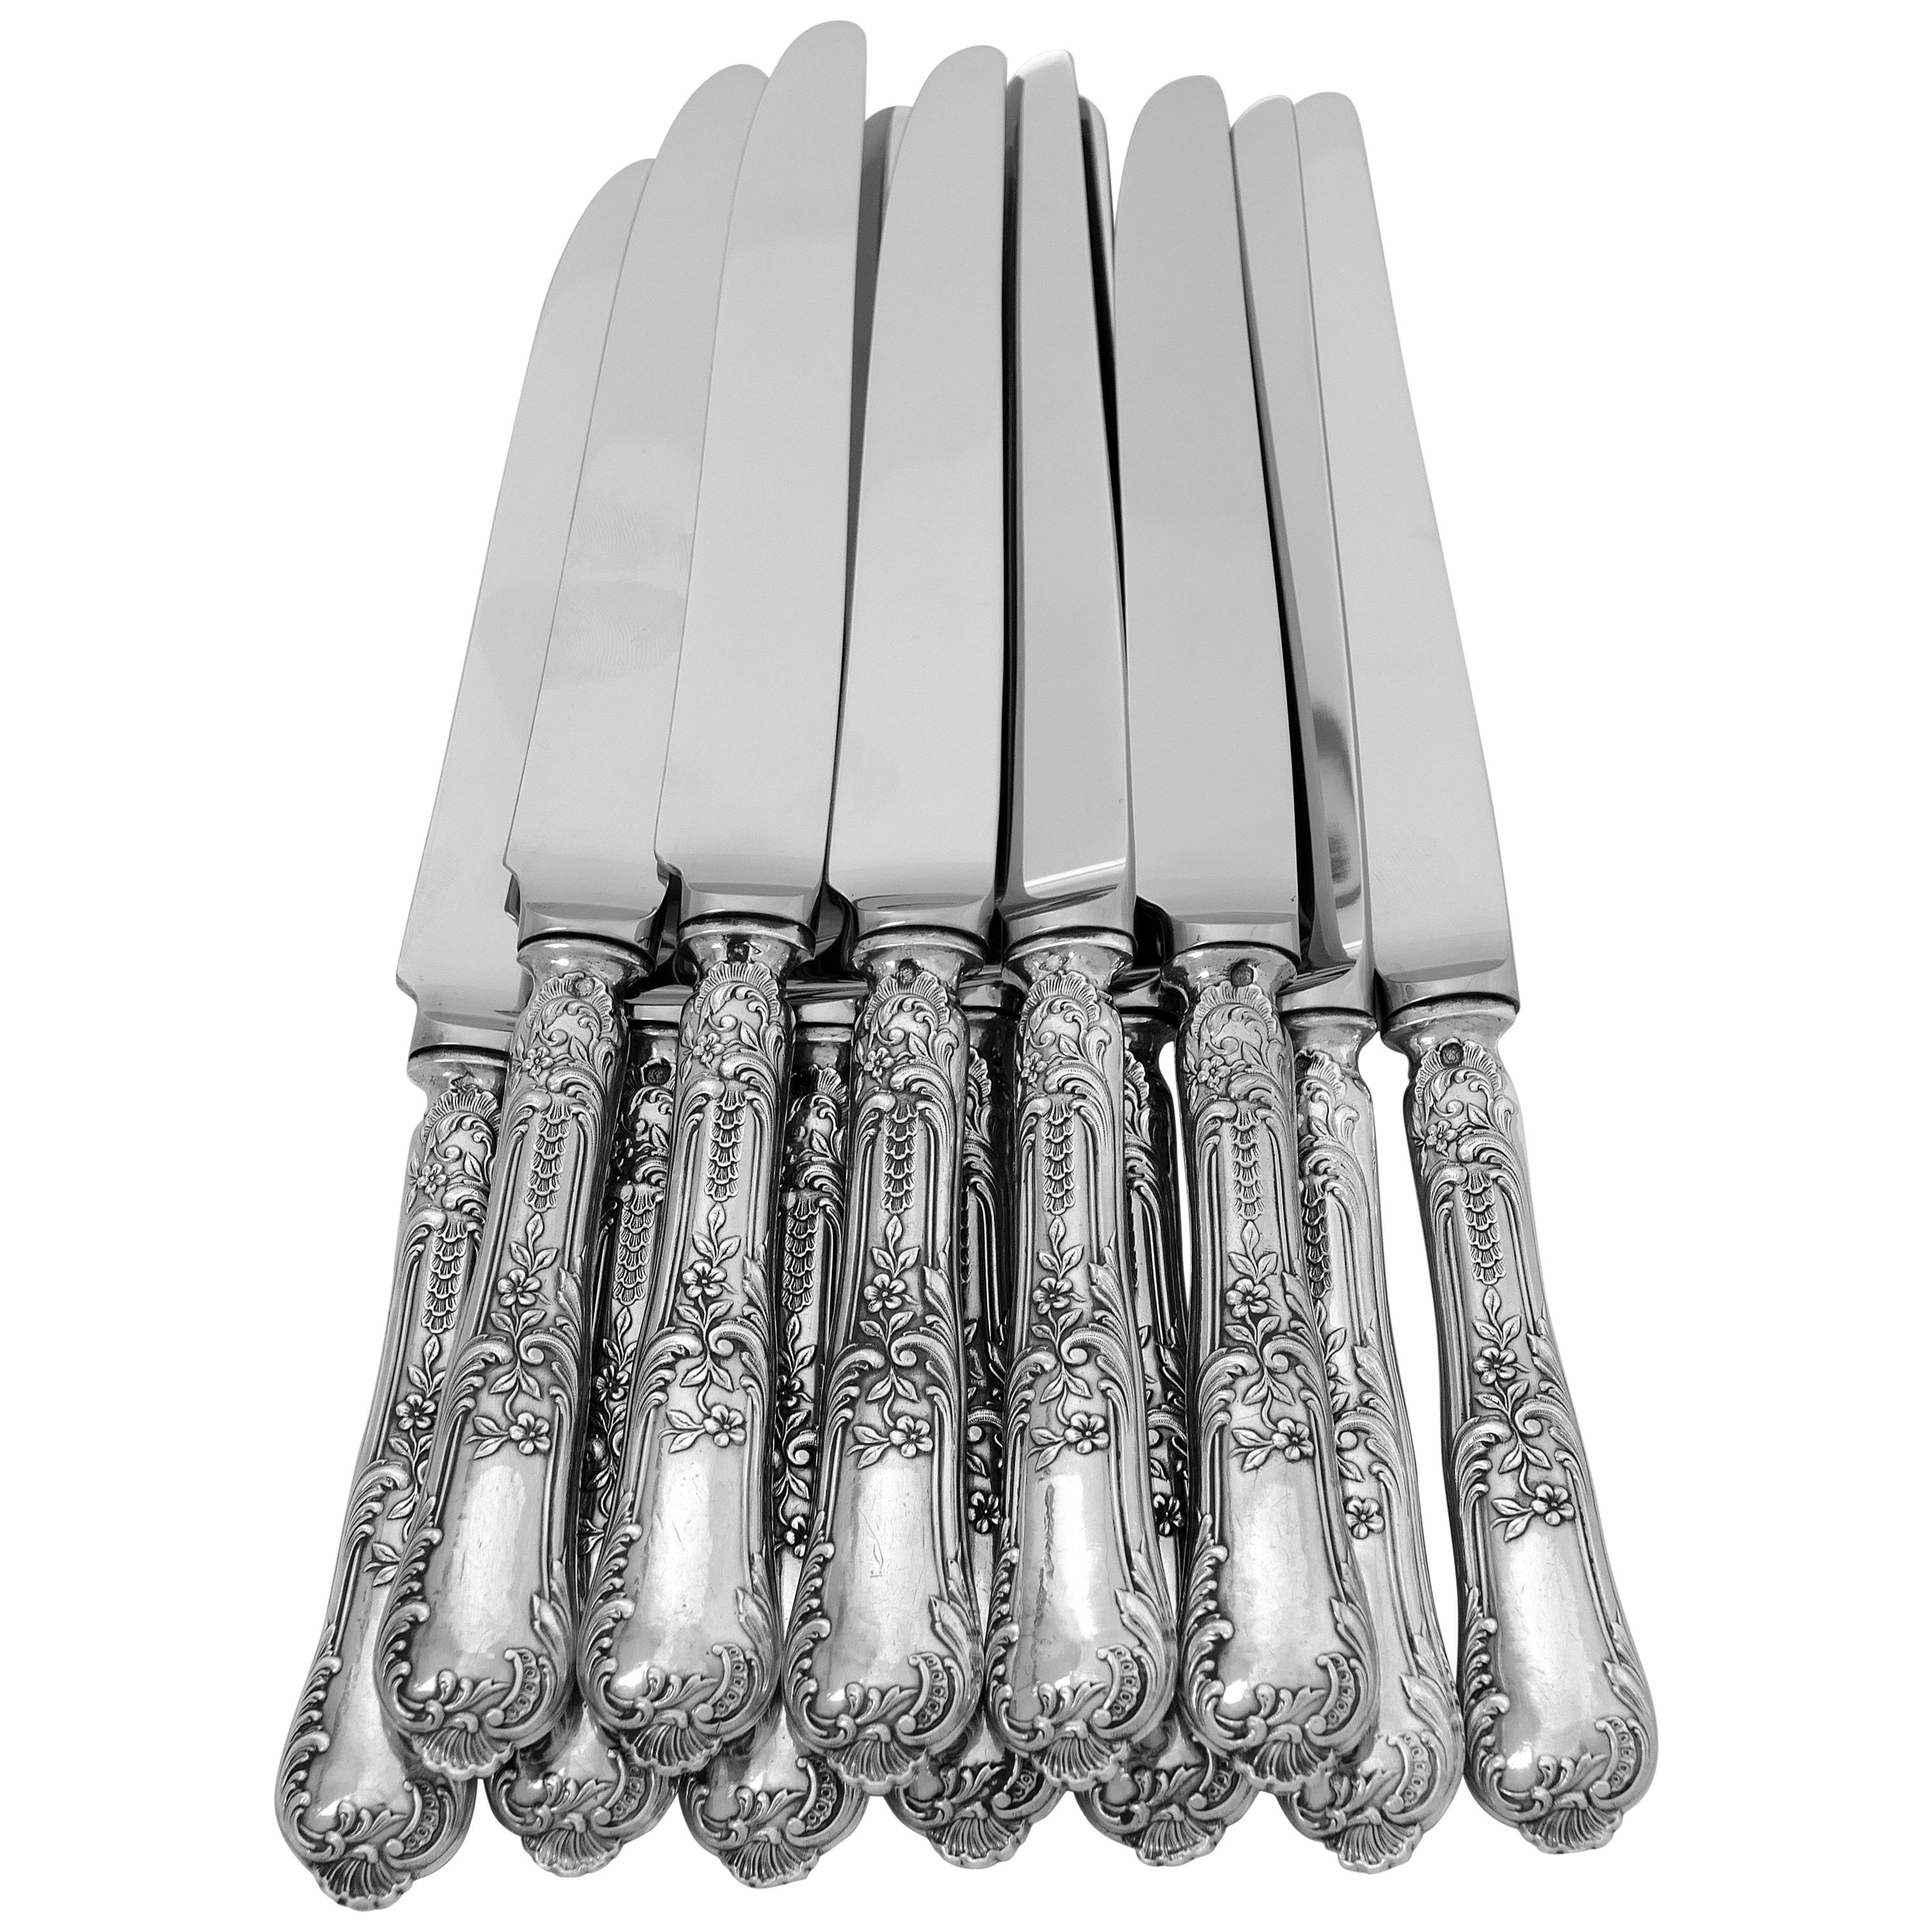 Boulenger French Sterling Silver Dinner Knife Set 12 Piece New Stainless Blades For Sale